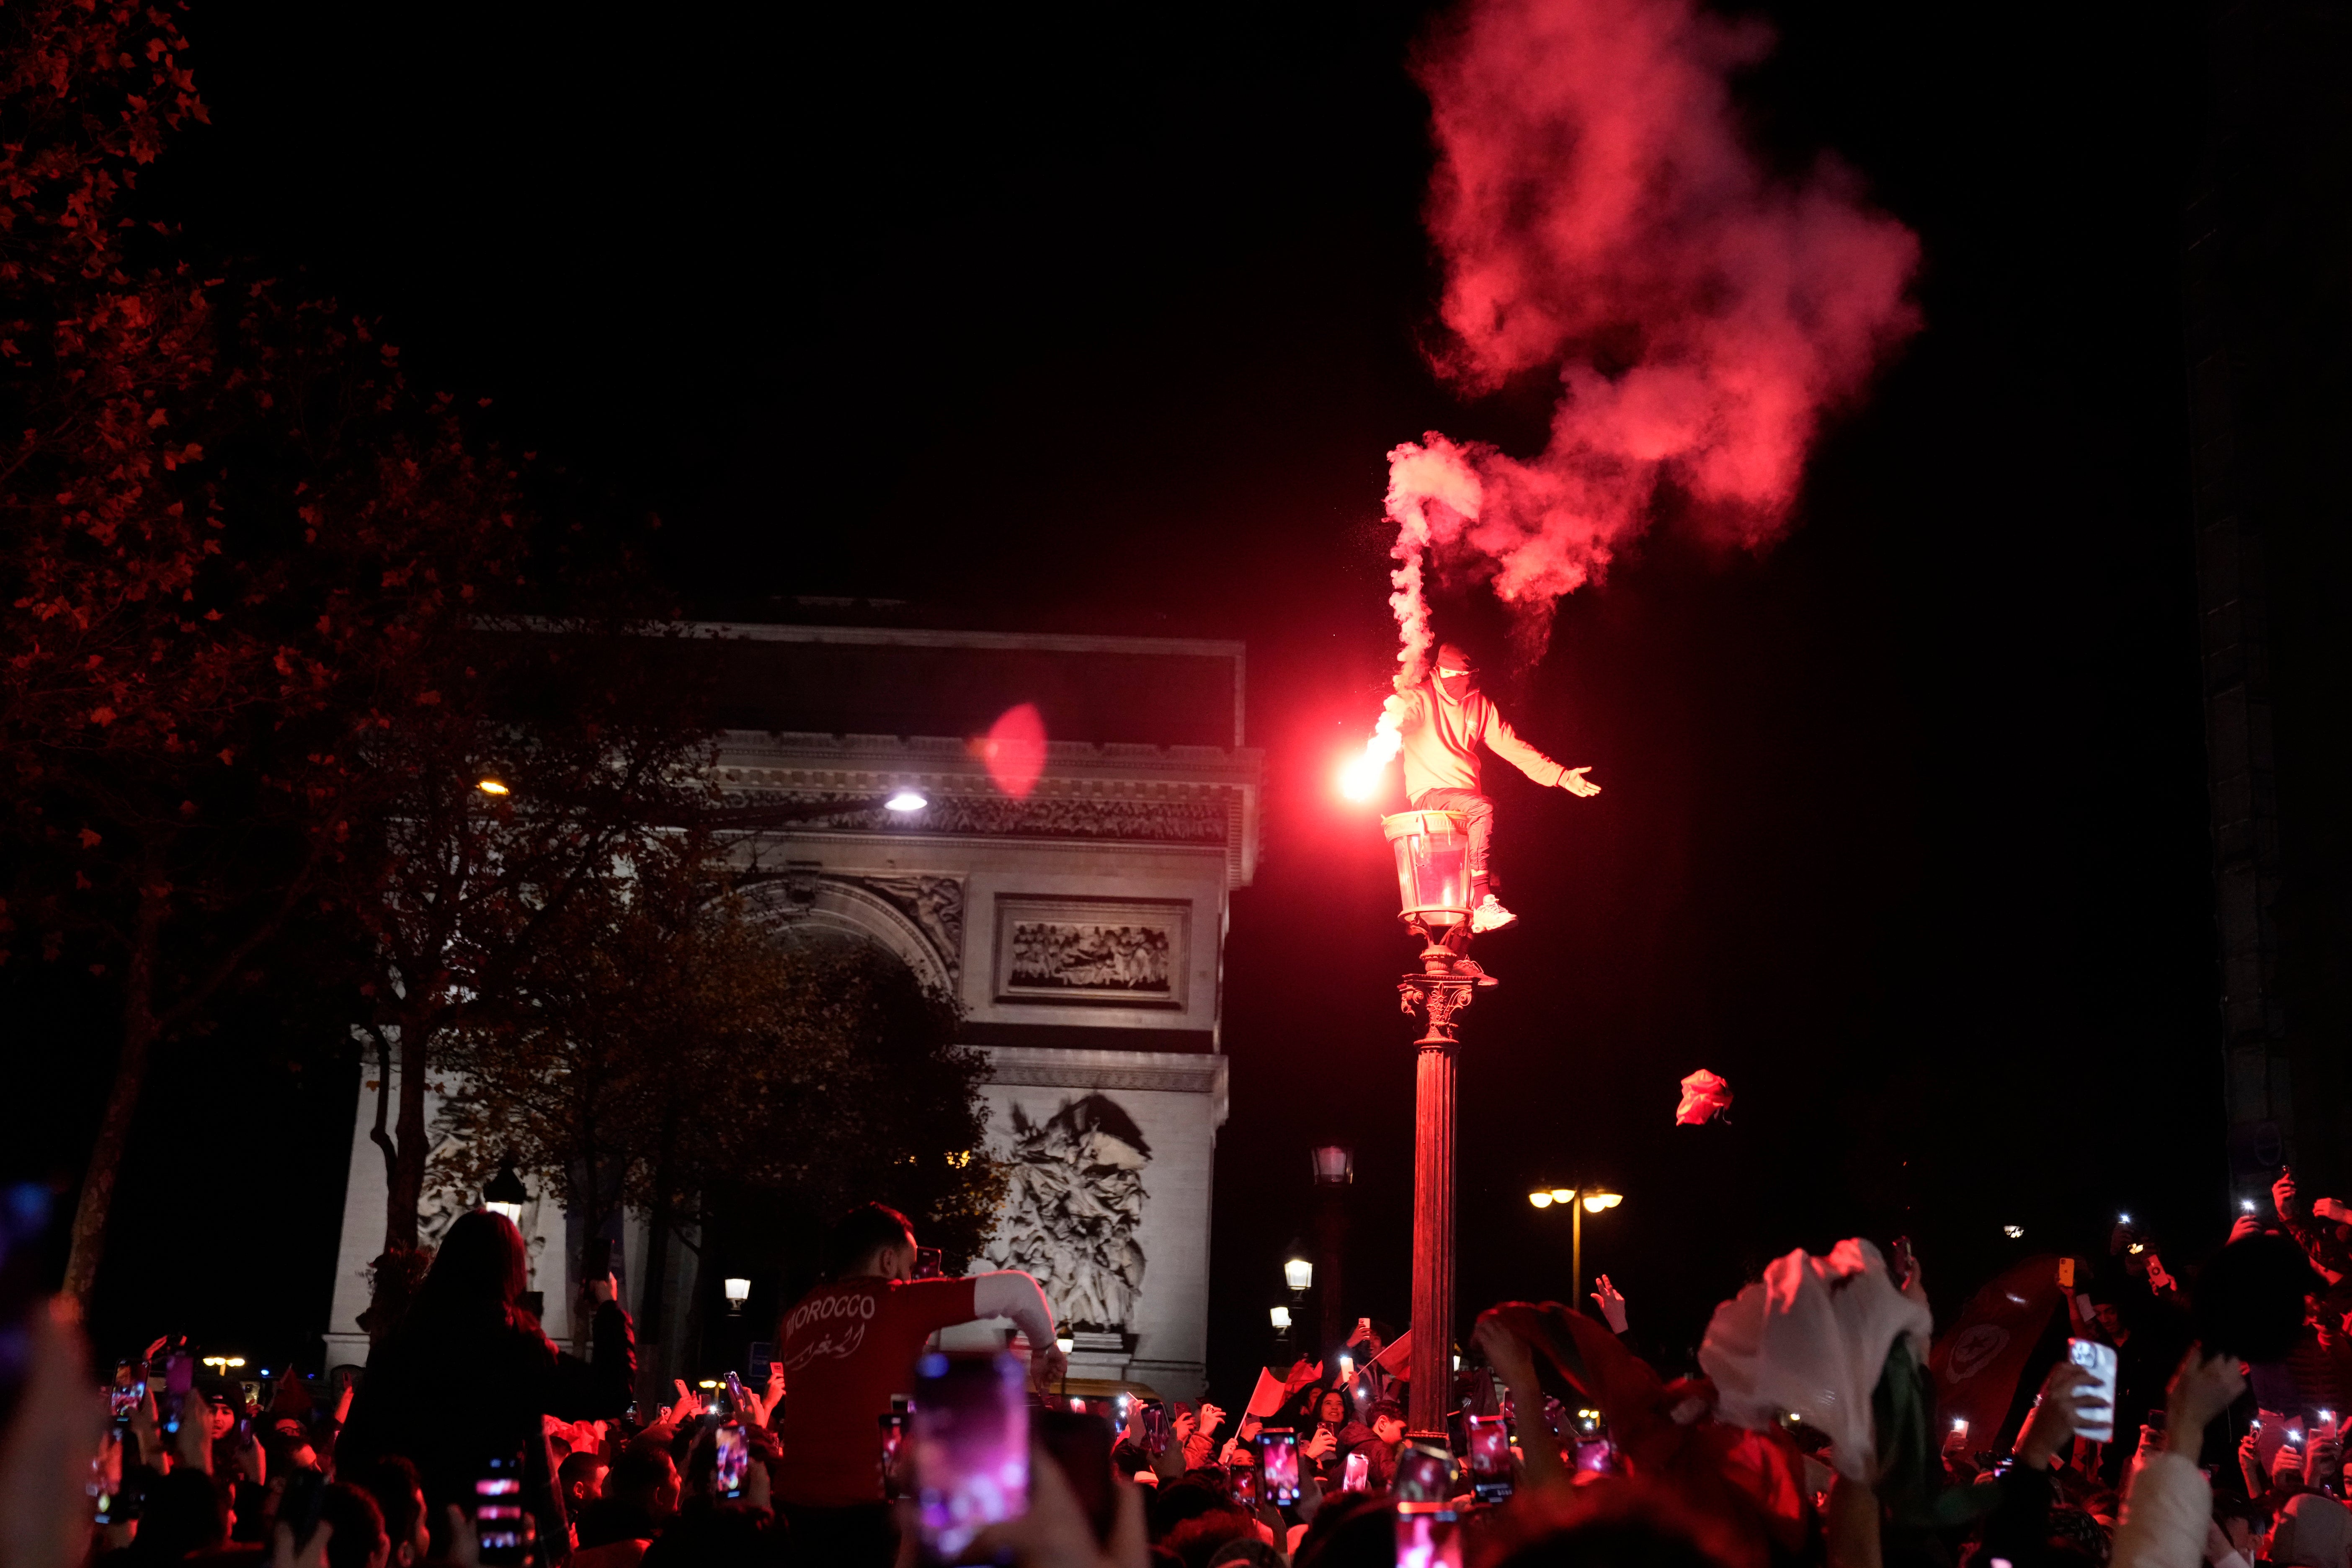 Morocco fans had earlier taken to the Champs-Elysees to celebrate after the quarter-final win over Portugal